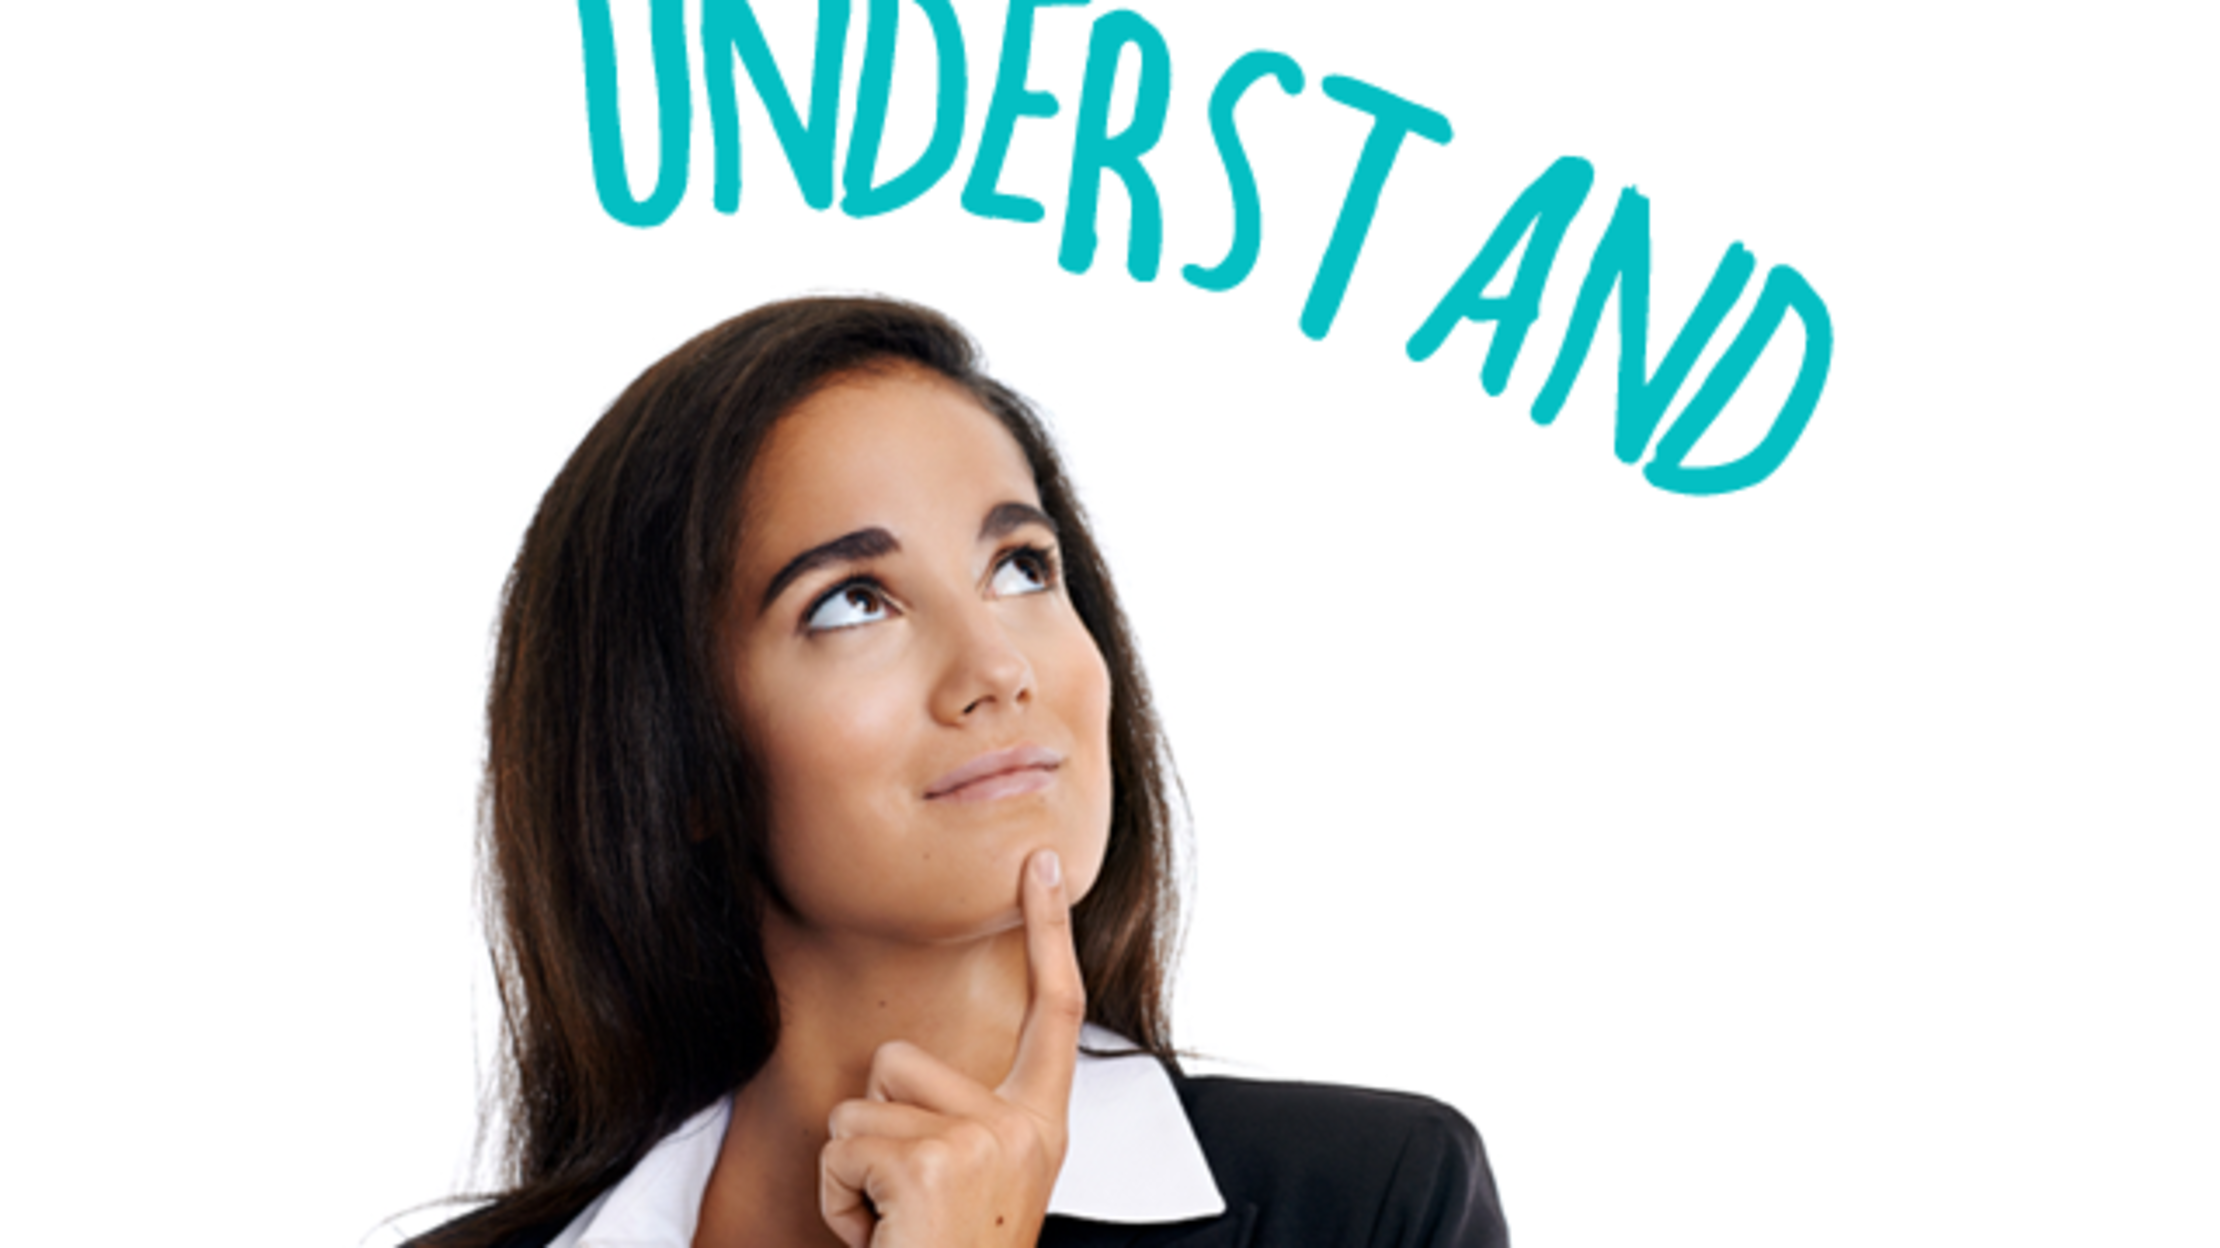 What Does 'Understand' Have to do With Standing Under? | Mental Floss